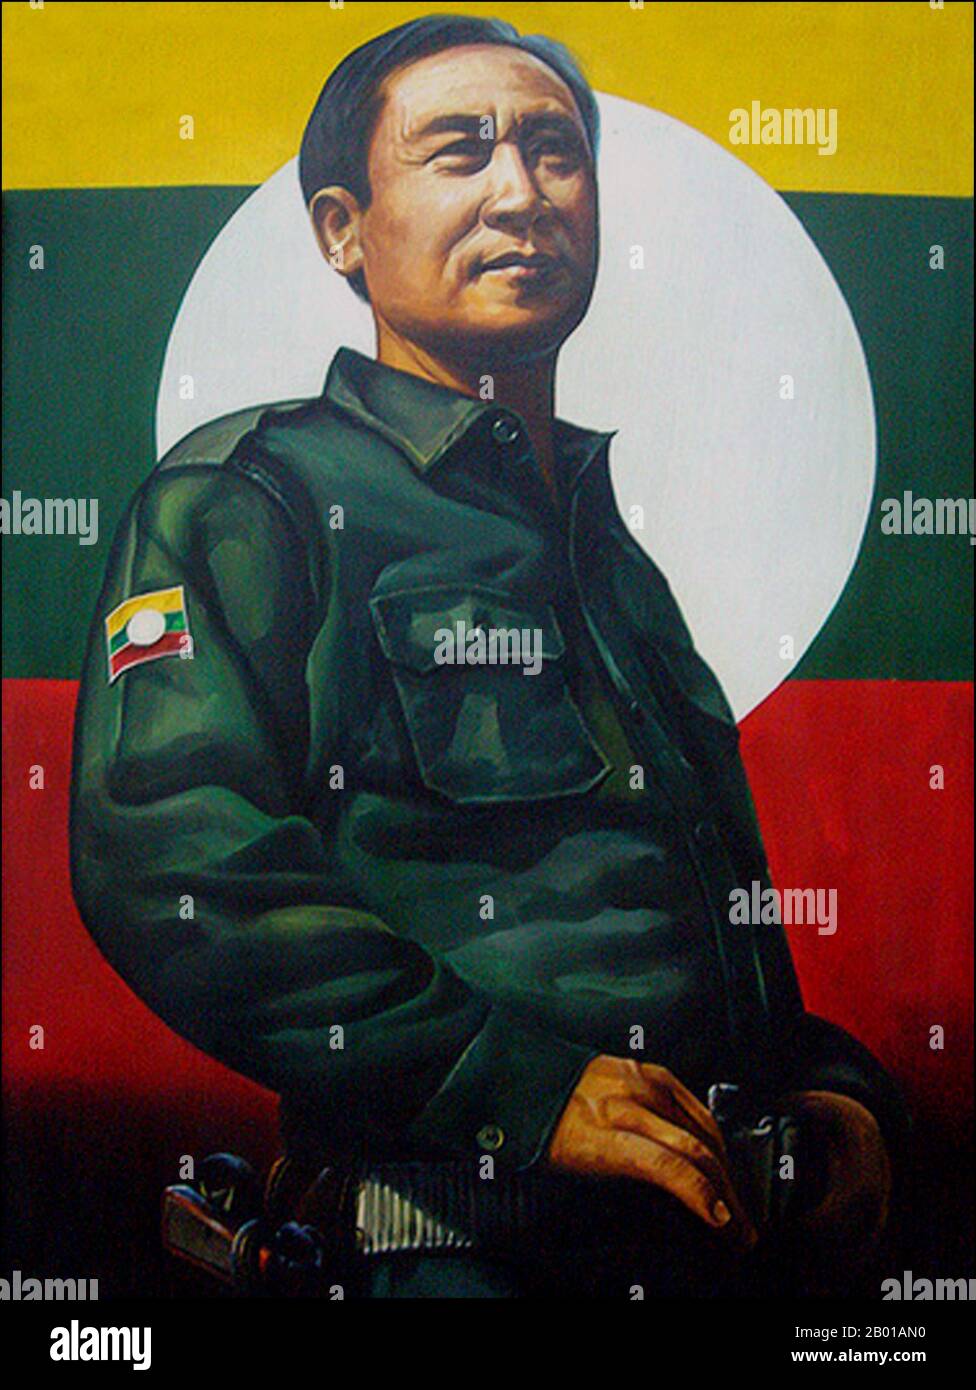 Burma/Myanmar: Khun Sa (17 Febraury 1934 - 26 October 2007) was a Burmese warlord. He was dubbed the 'Opium King' due to his opium trading in the Golden Triangle region. He was also the leader of the Shan United Army and the Mong Tai Army.  Khun Sa was born to a Chinese father and a Shan mother. He adopted the pseudonym Khun Sa, meaning 'Prince Prosperous'. In his youth he trained with the Kuomintang, which had fled into the border regions of Burma from Yunnan upon its defeat in the Chinese Civil War, and eventually went on to form his own army of a few hundred men. Stock Photo